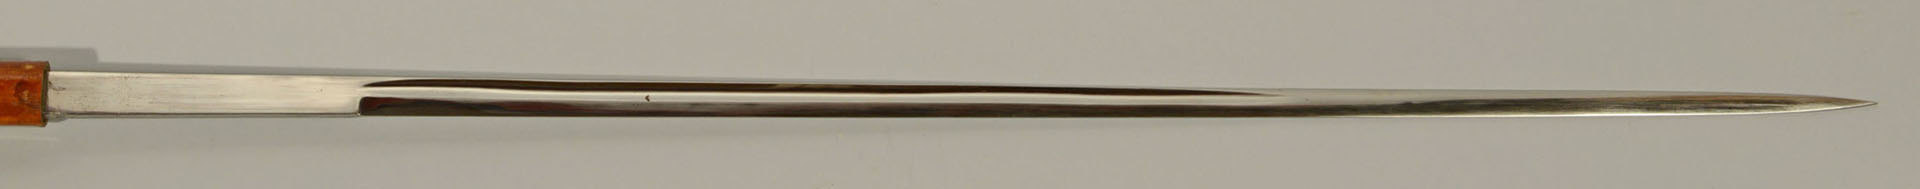 Lot 265: Toledo Sword Cane w/ Marked English Silver Top